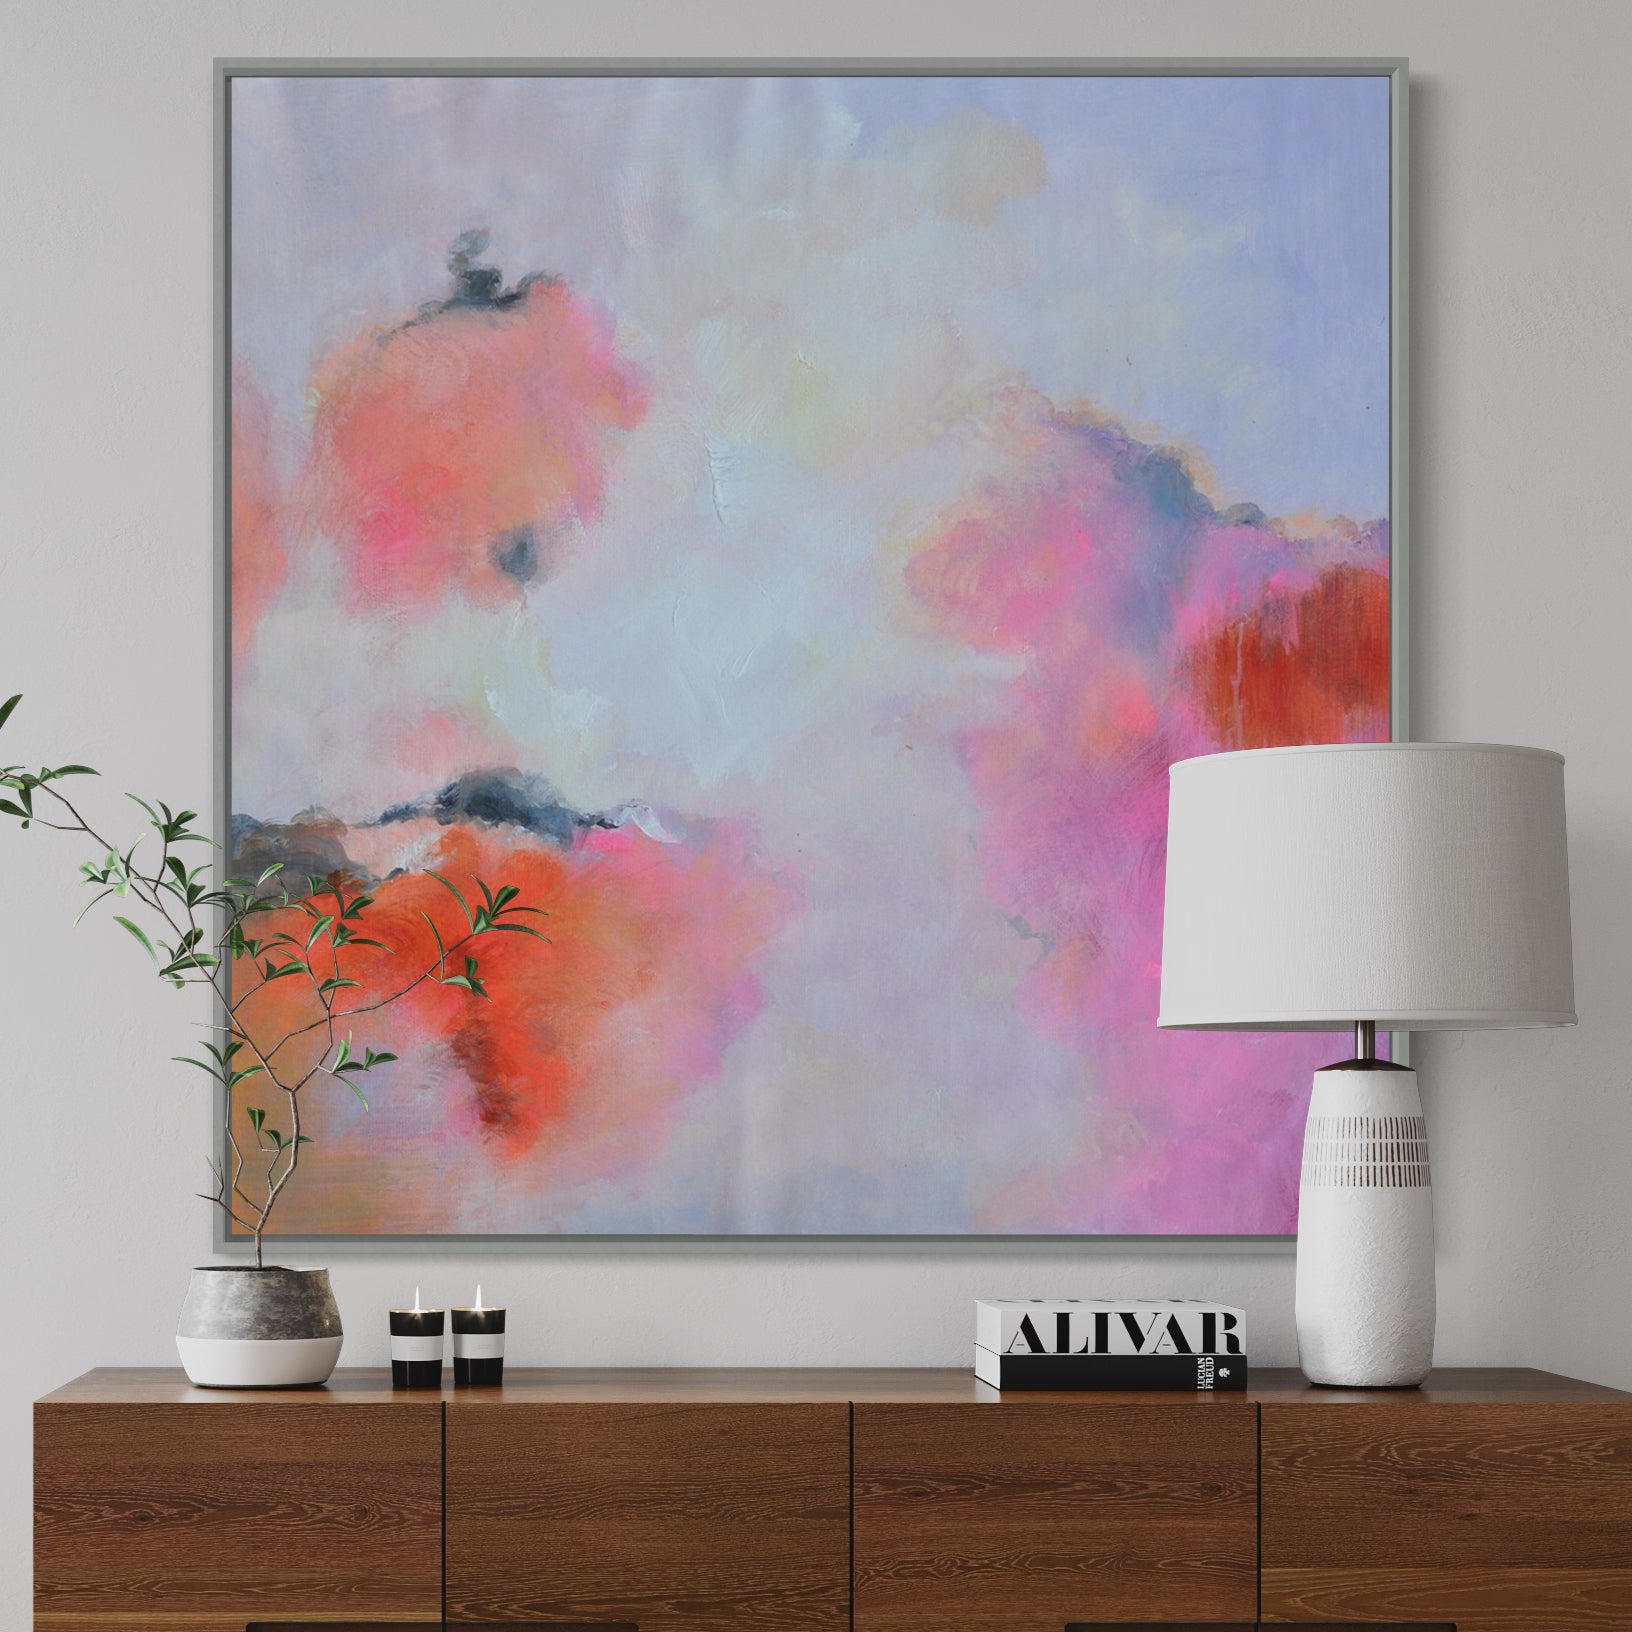 Cotton Candy, Black And Silver / 100x100cm